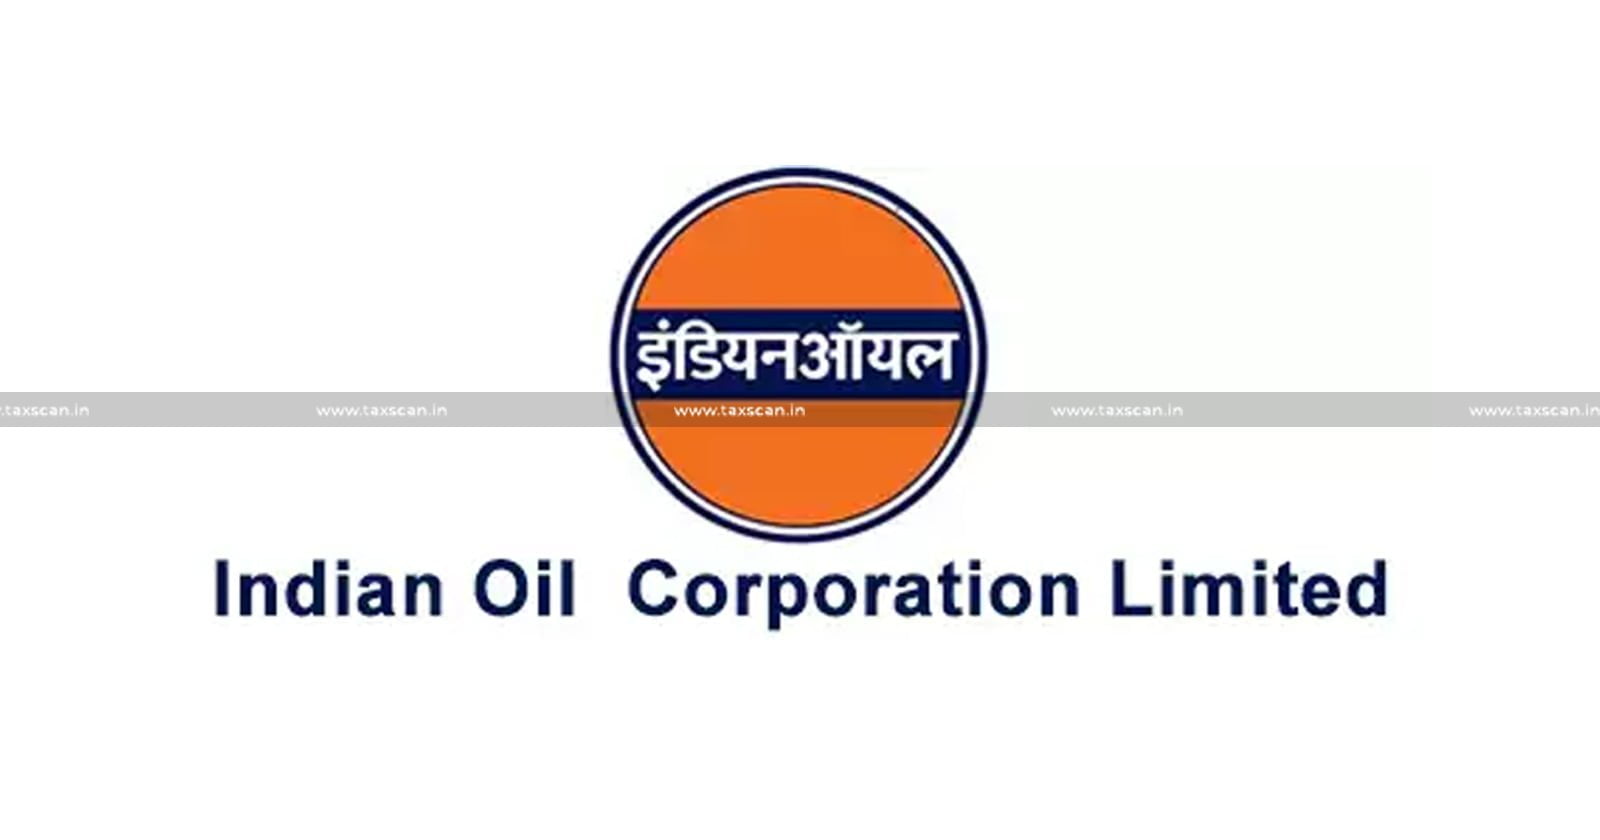 Commissioner - Remand Matter to Lower Authority - Examining Documentary Evidence - Unjust Enrichment - CESTAT rules in Favour of Indian Oil Corporation - Indian Oil Corporation - CESTAT - taxscan